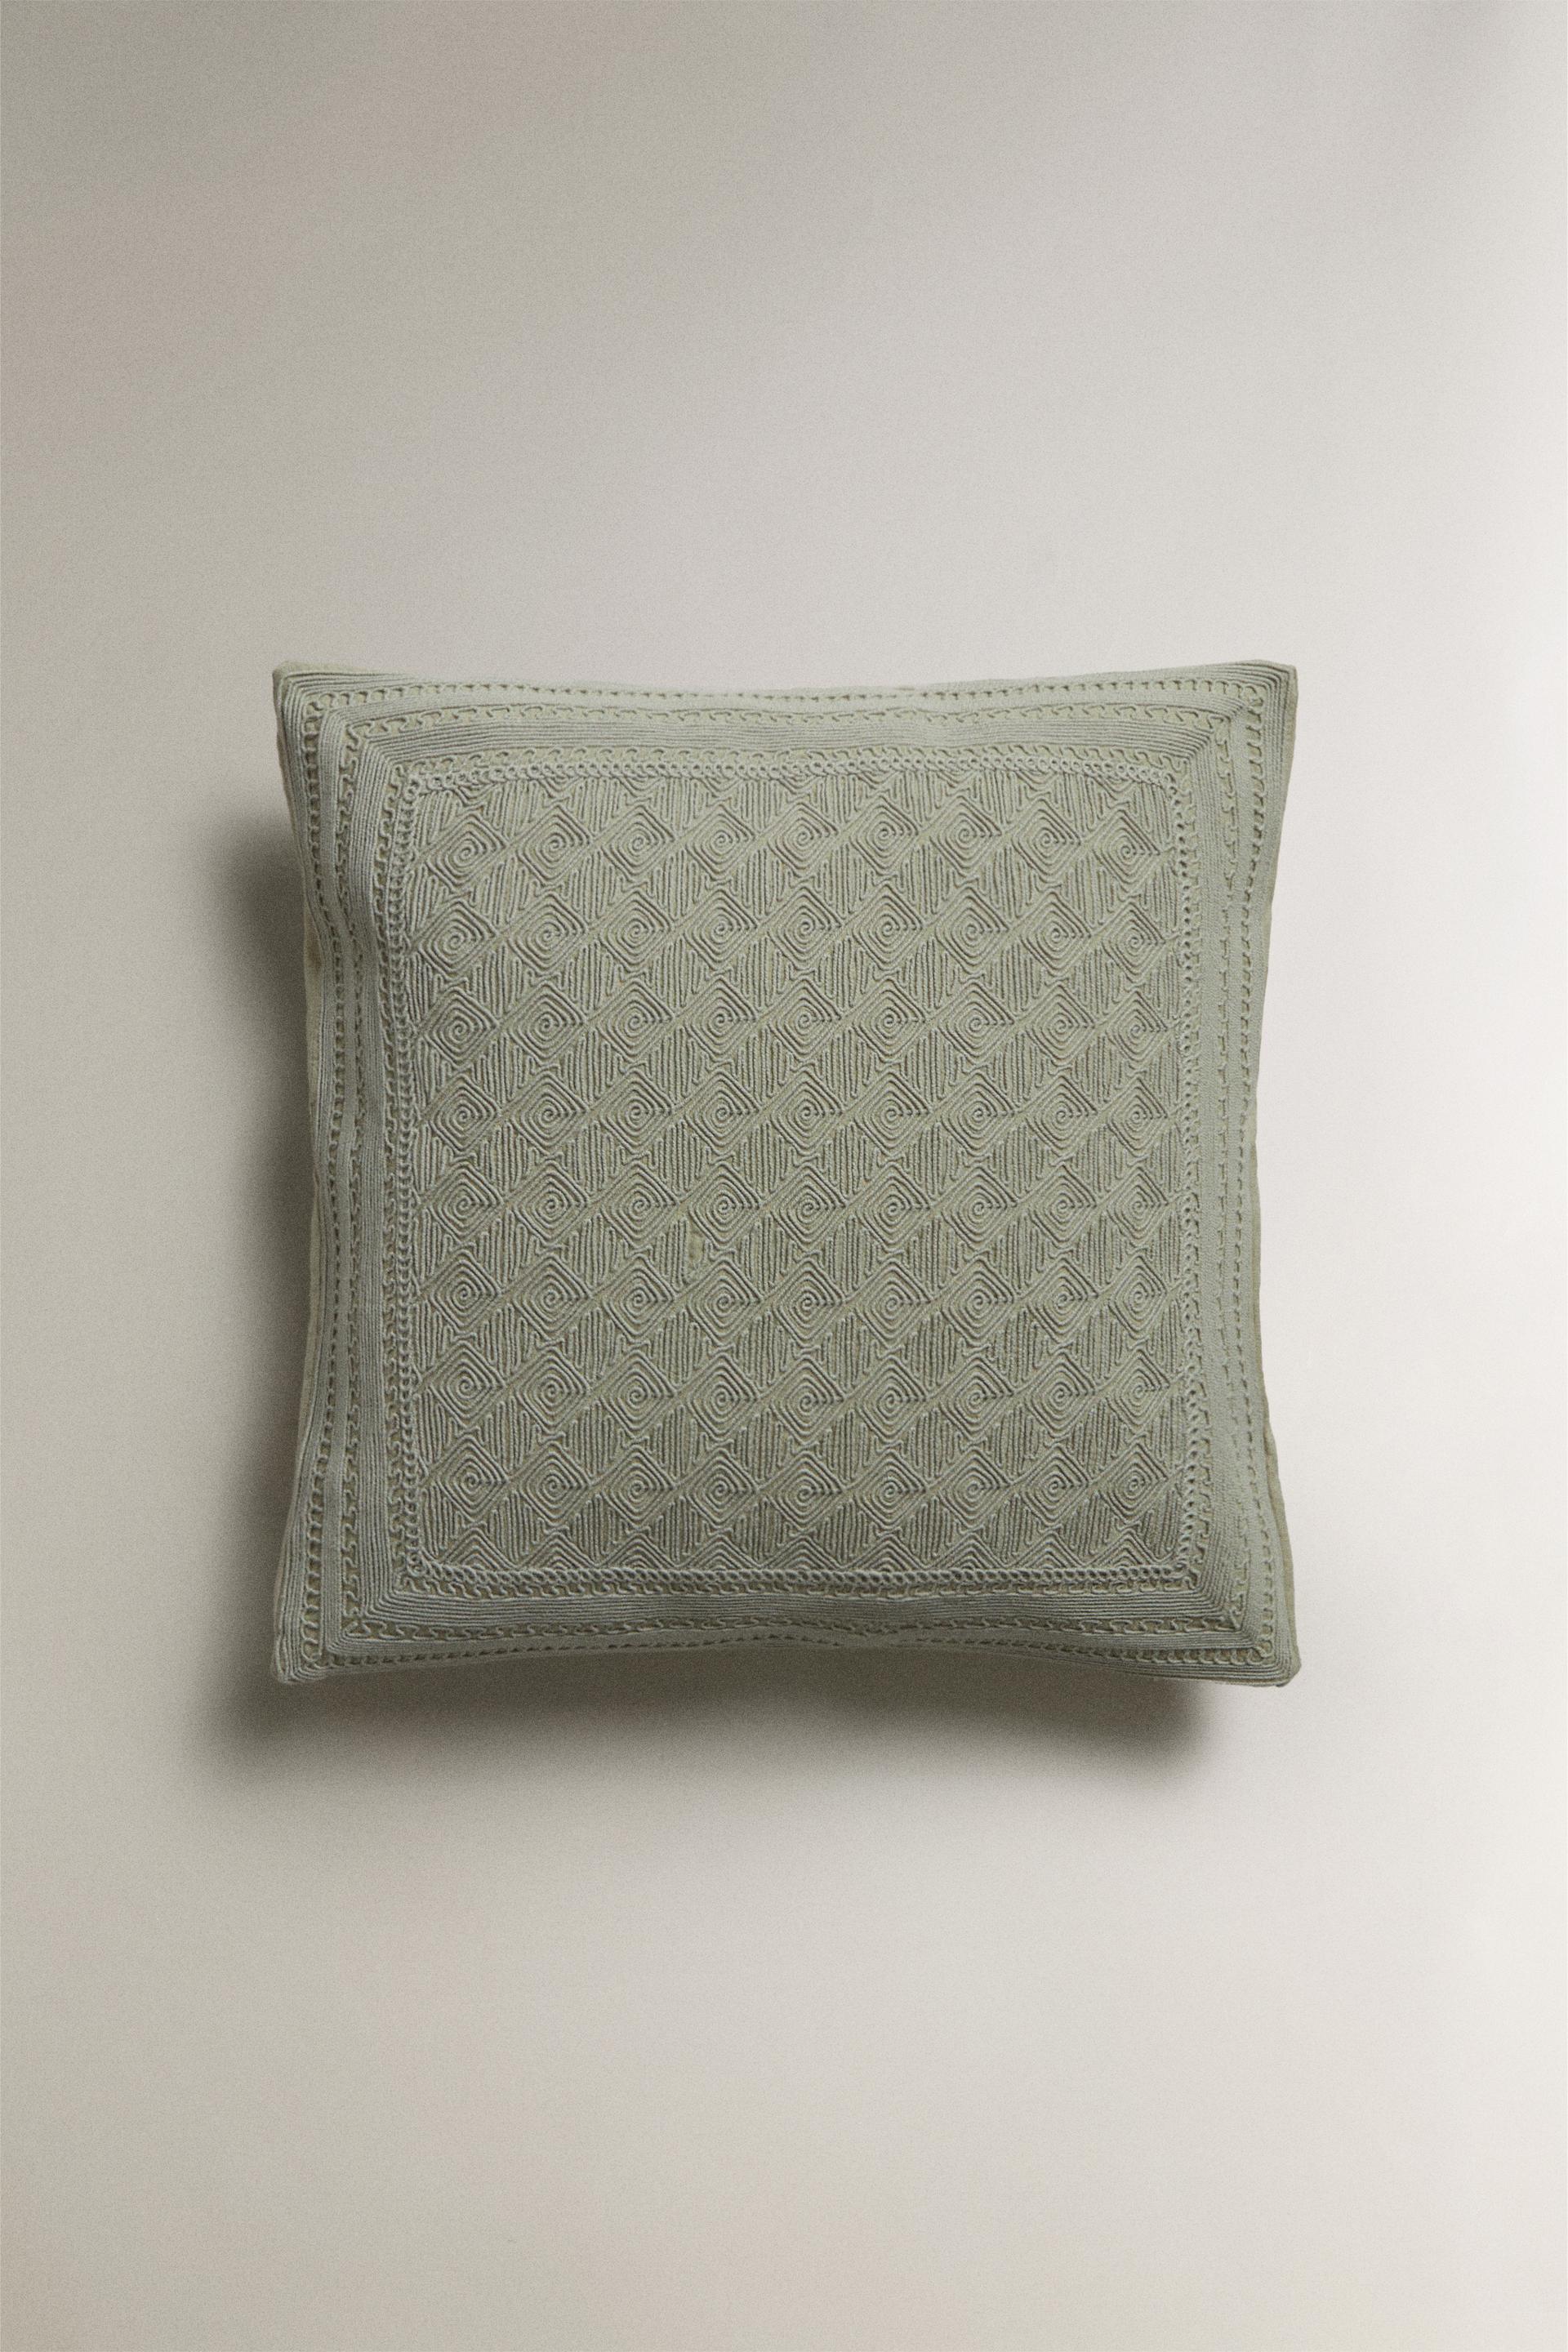 THROW PILLOW COVER WITH RAISED DESIGN ZARA